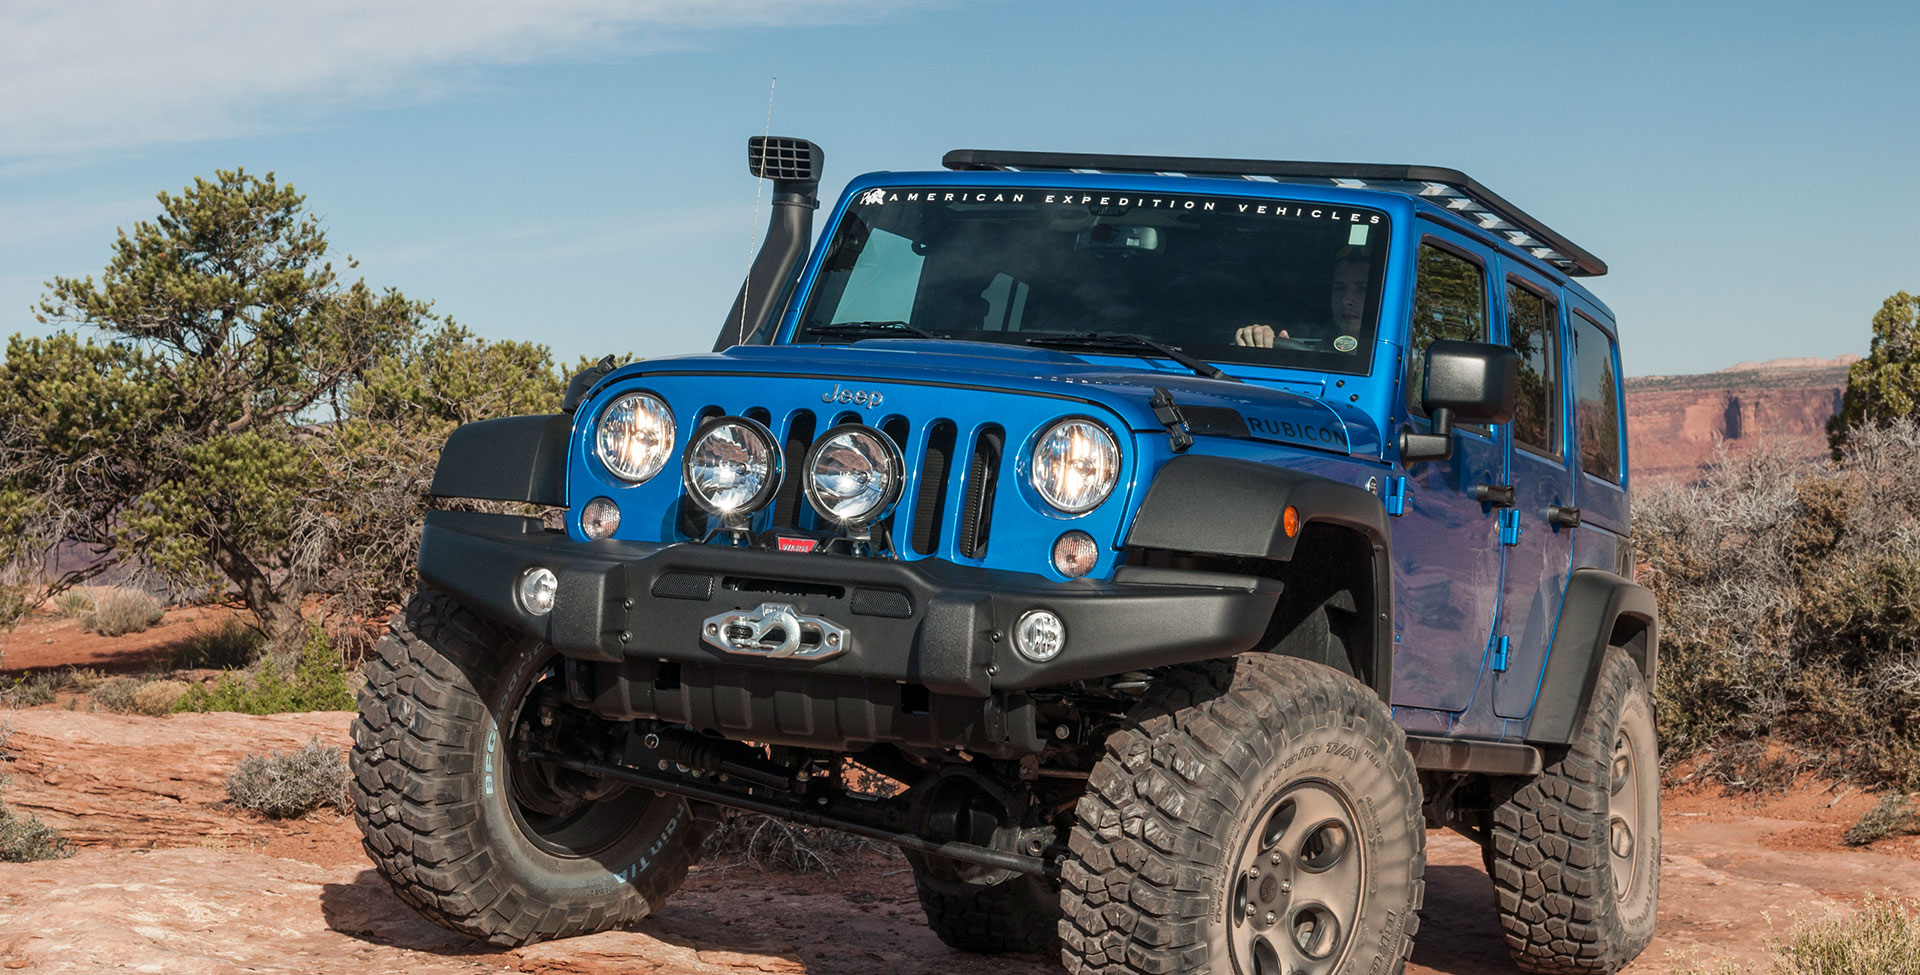 Bumpers & Accessories Products - American Expedition Vehicles - AEV